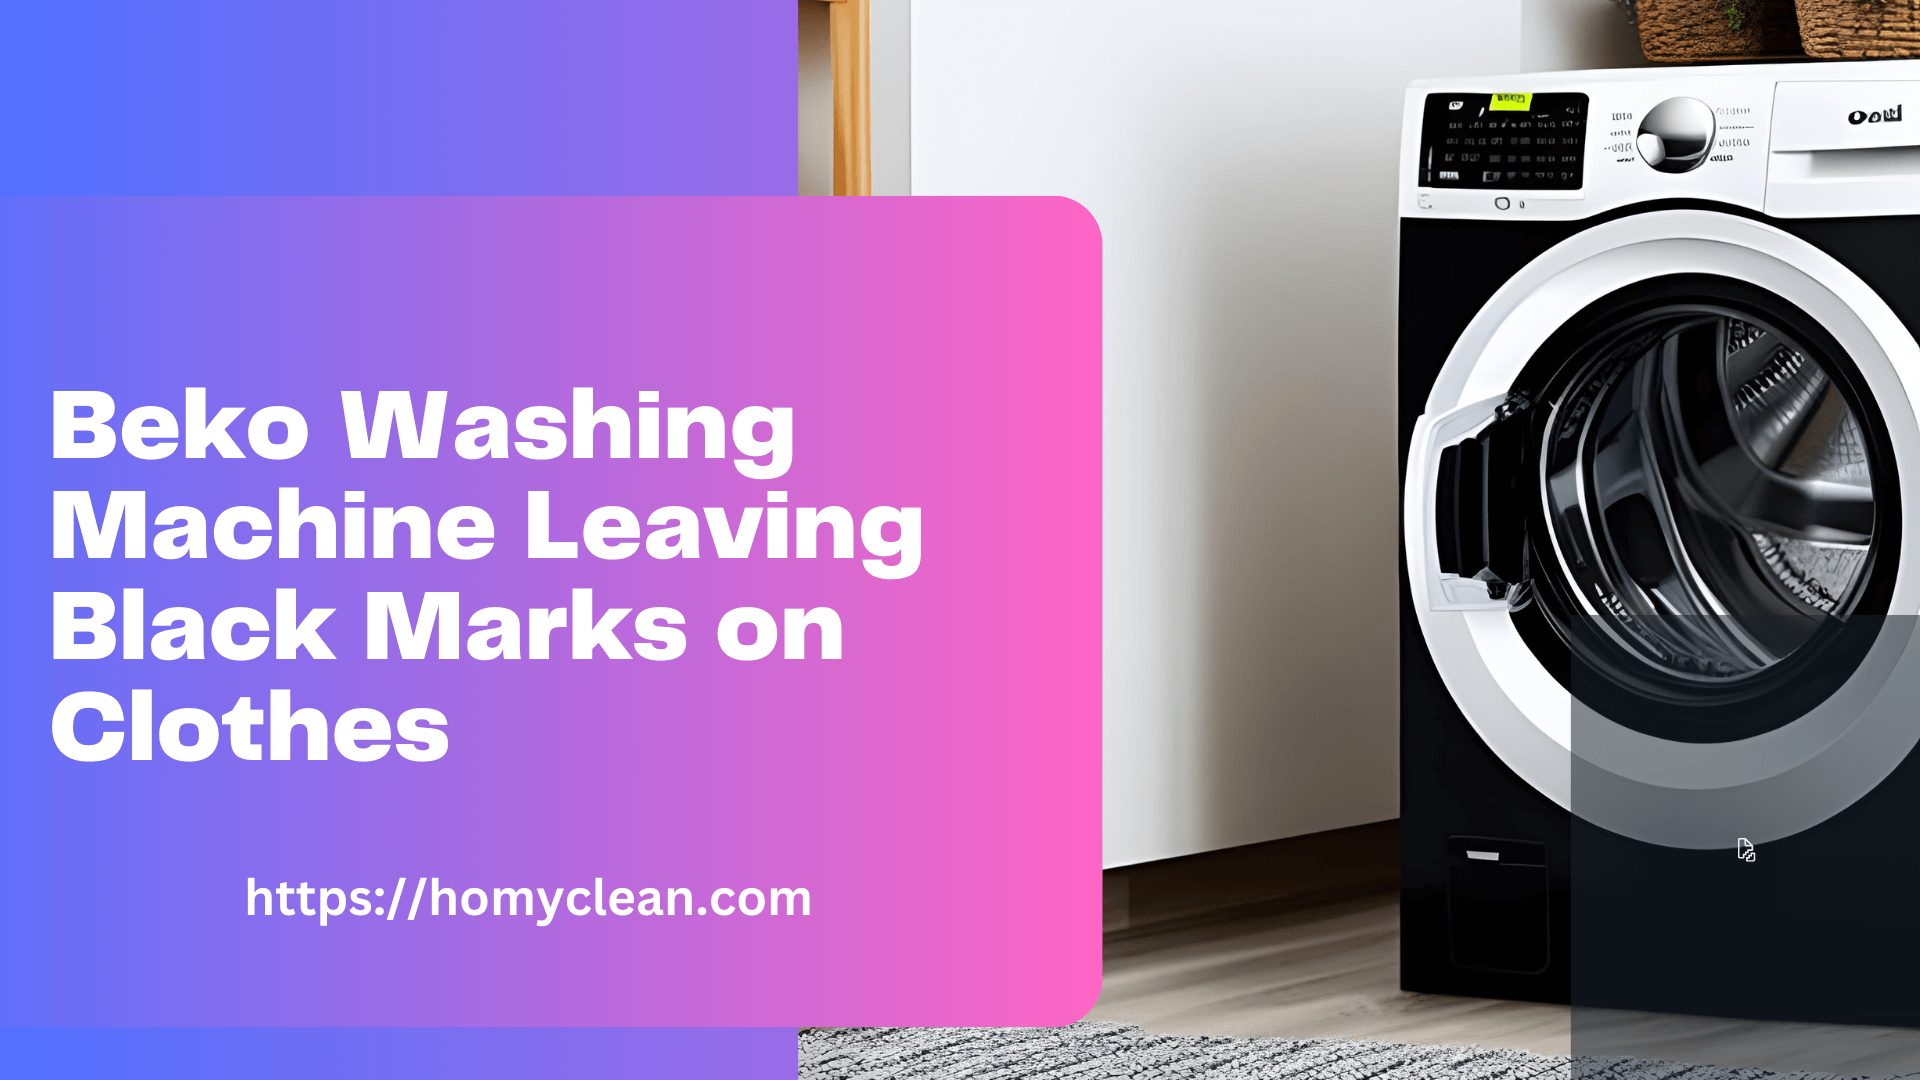 Why Beko Washing Machine Leaving Black Marks on Clothes – Ultimate Guide?